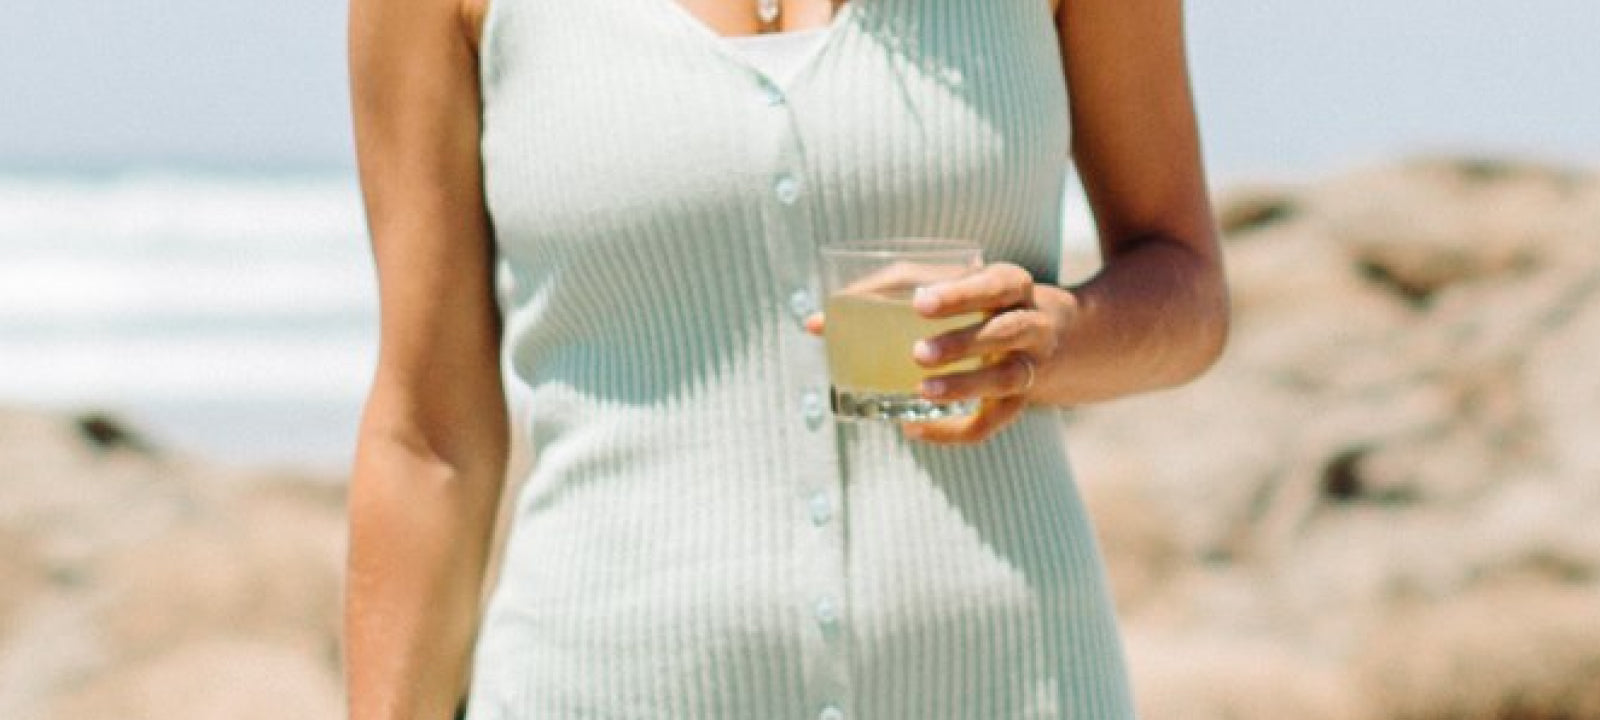 A woman in a teal top enjoying a Your Super drink at the beach